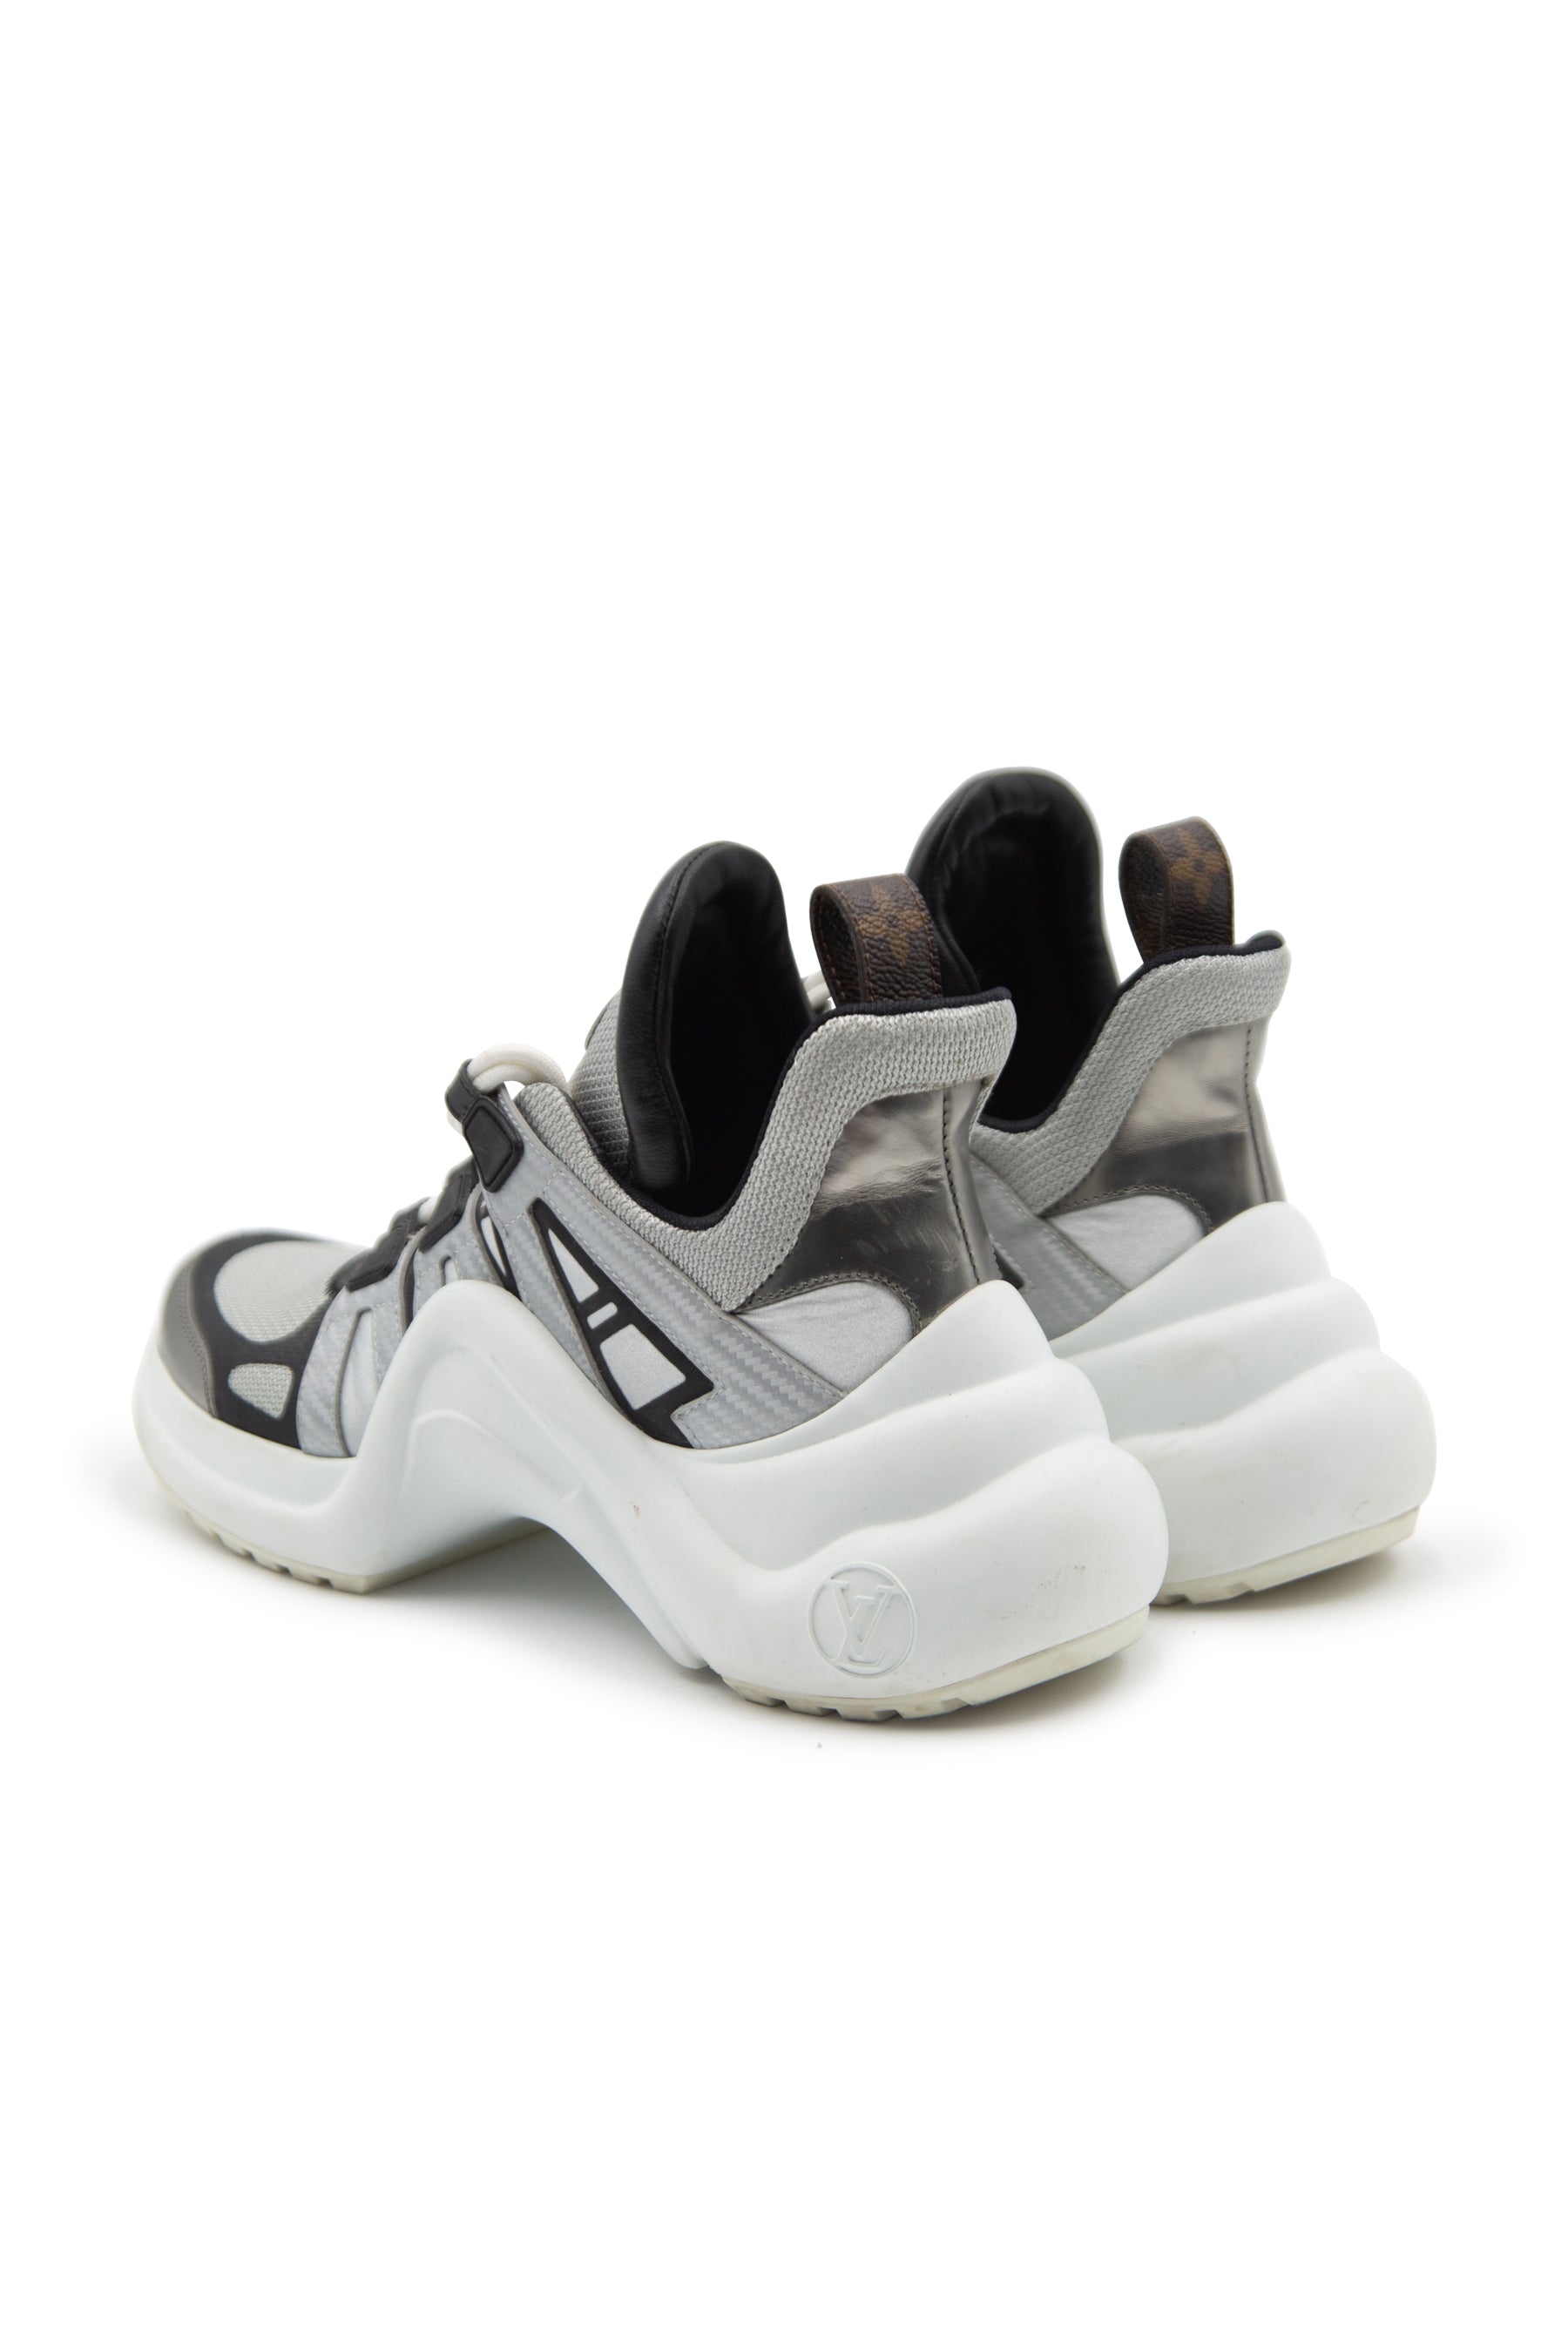 Louis Vuitton LV Trainer Silver Pre-Owned